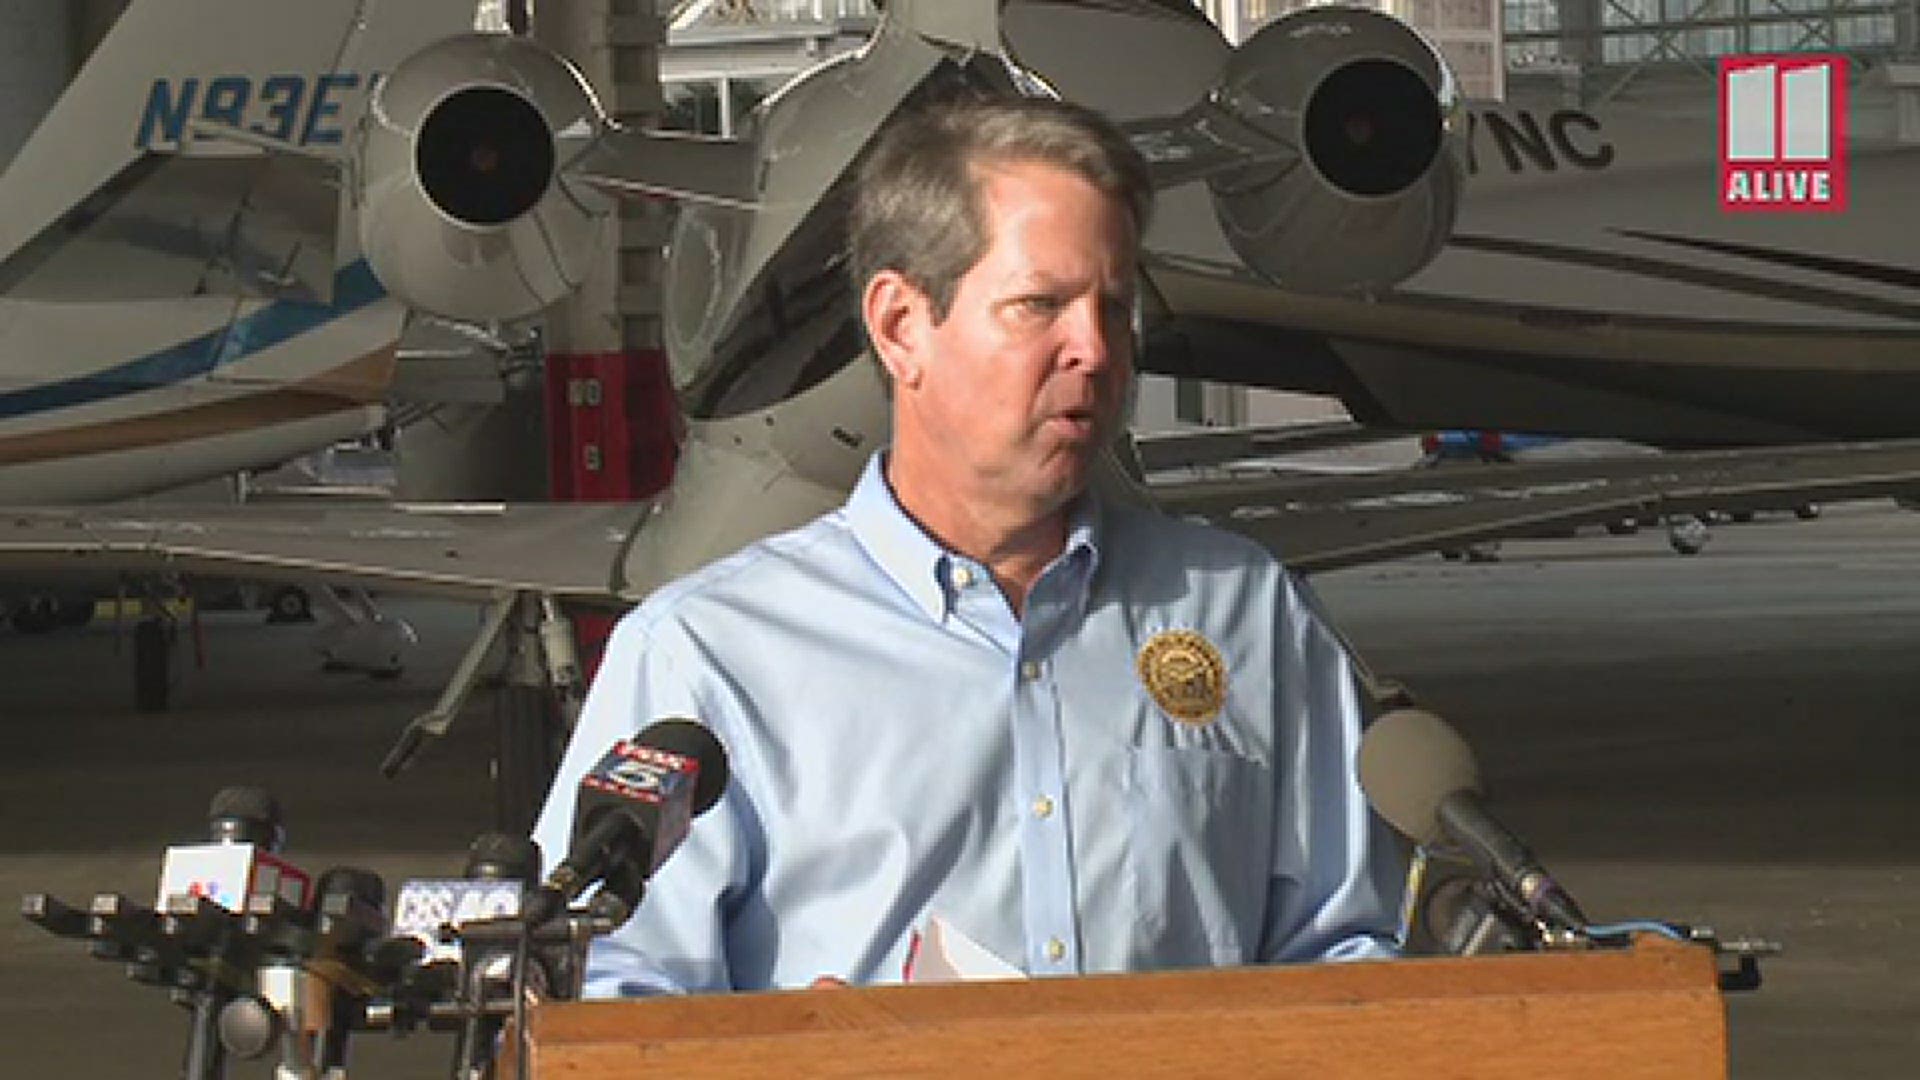 The governor made his comments before embarking on a "Wear a Mask" tour on Wednesday.